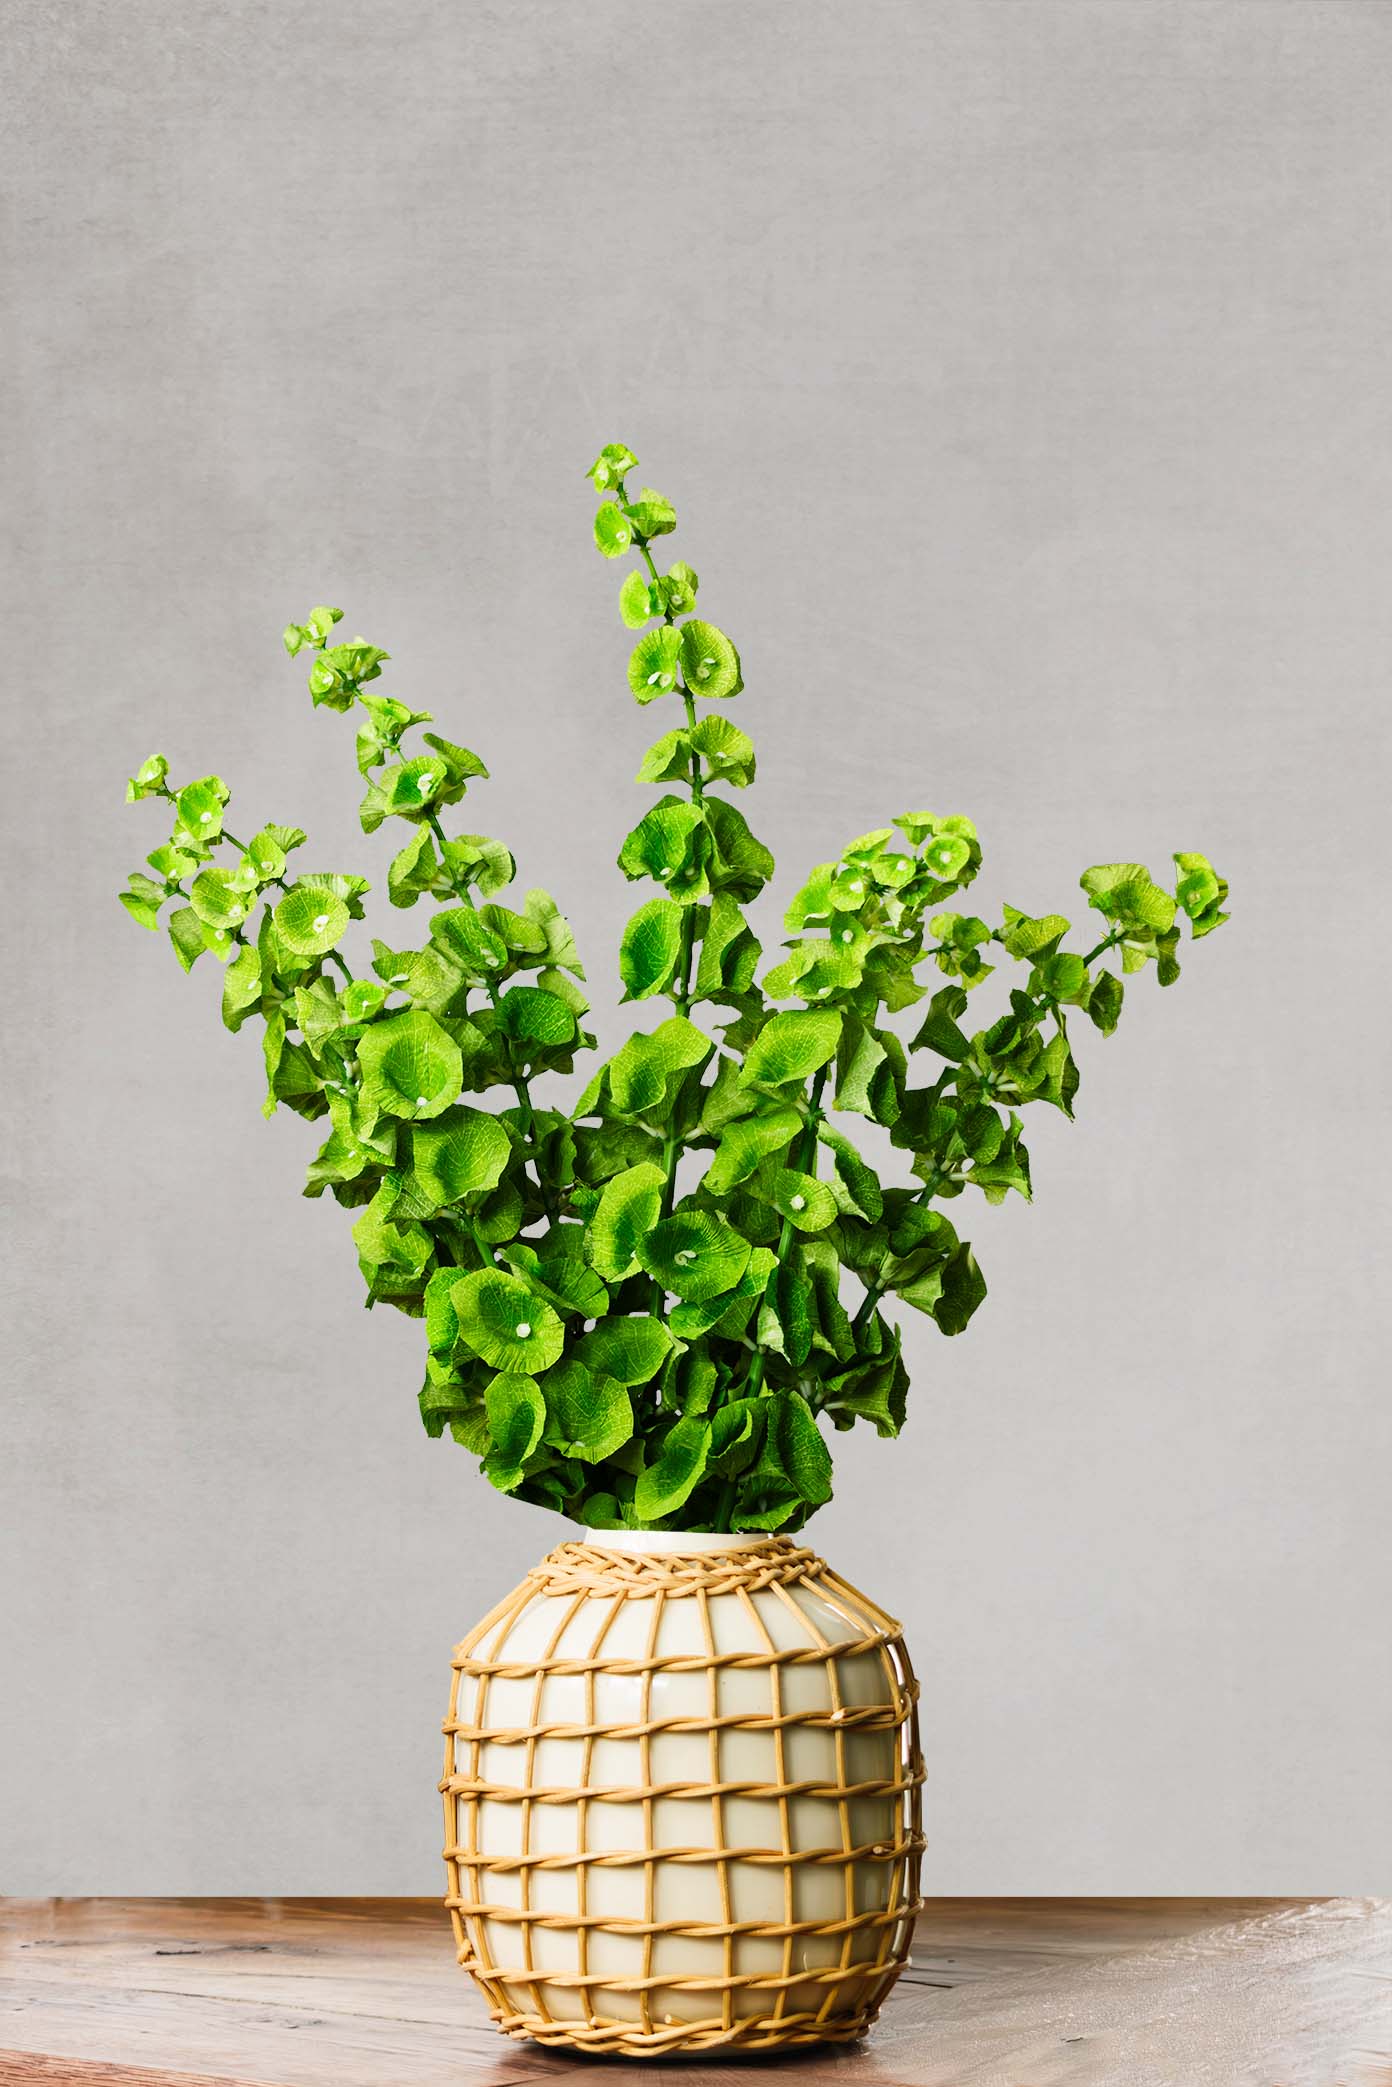 Artisanal natural rattan decorative ceramic vase filled with bells of ireland with gray background.